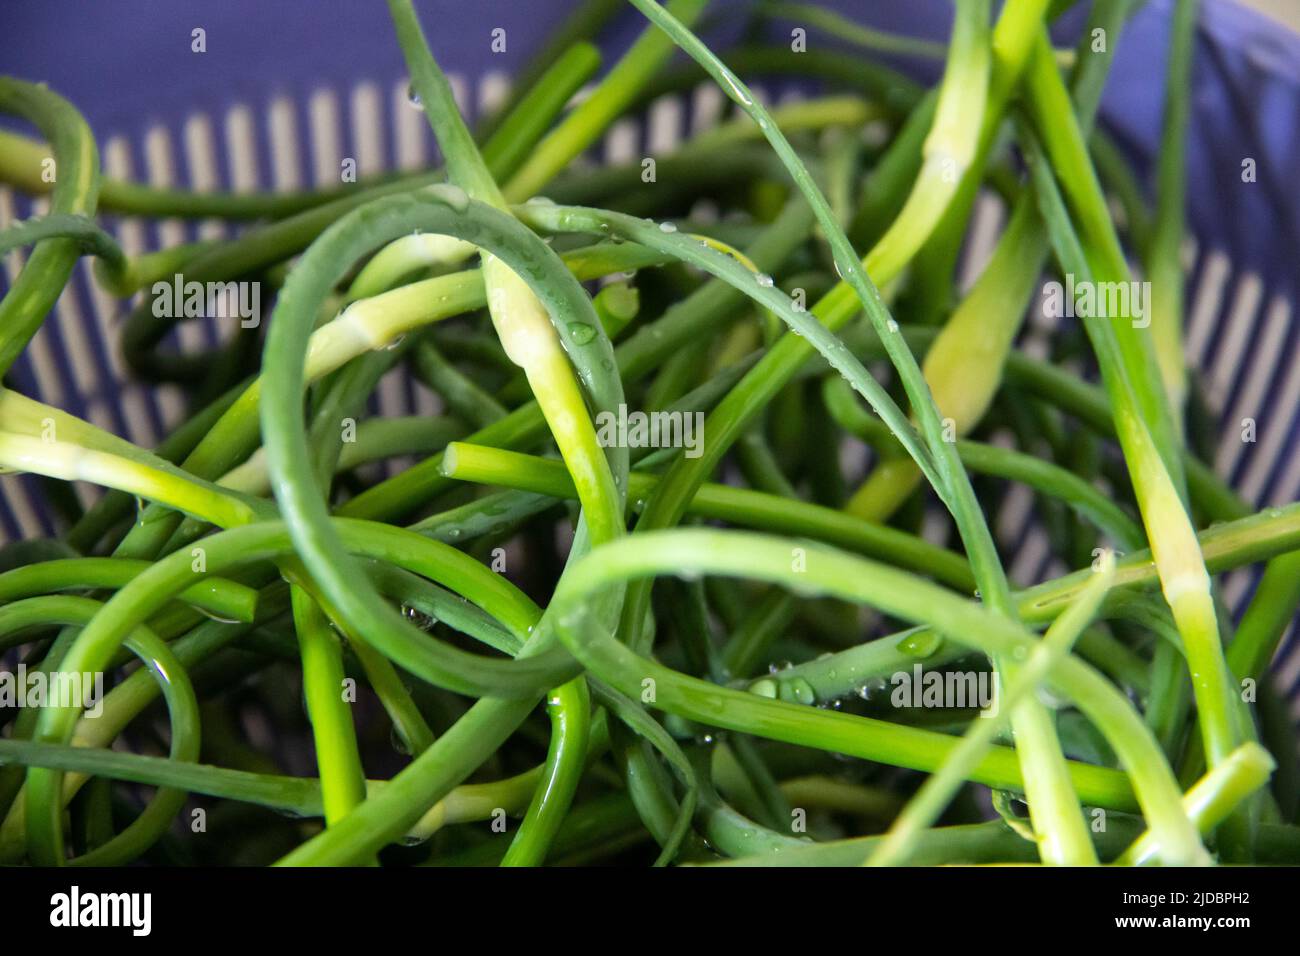 Close-up view of fresh garlic scapes clean with water. Green freshly harvested garlic scapes. Stock Photo